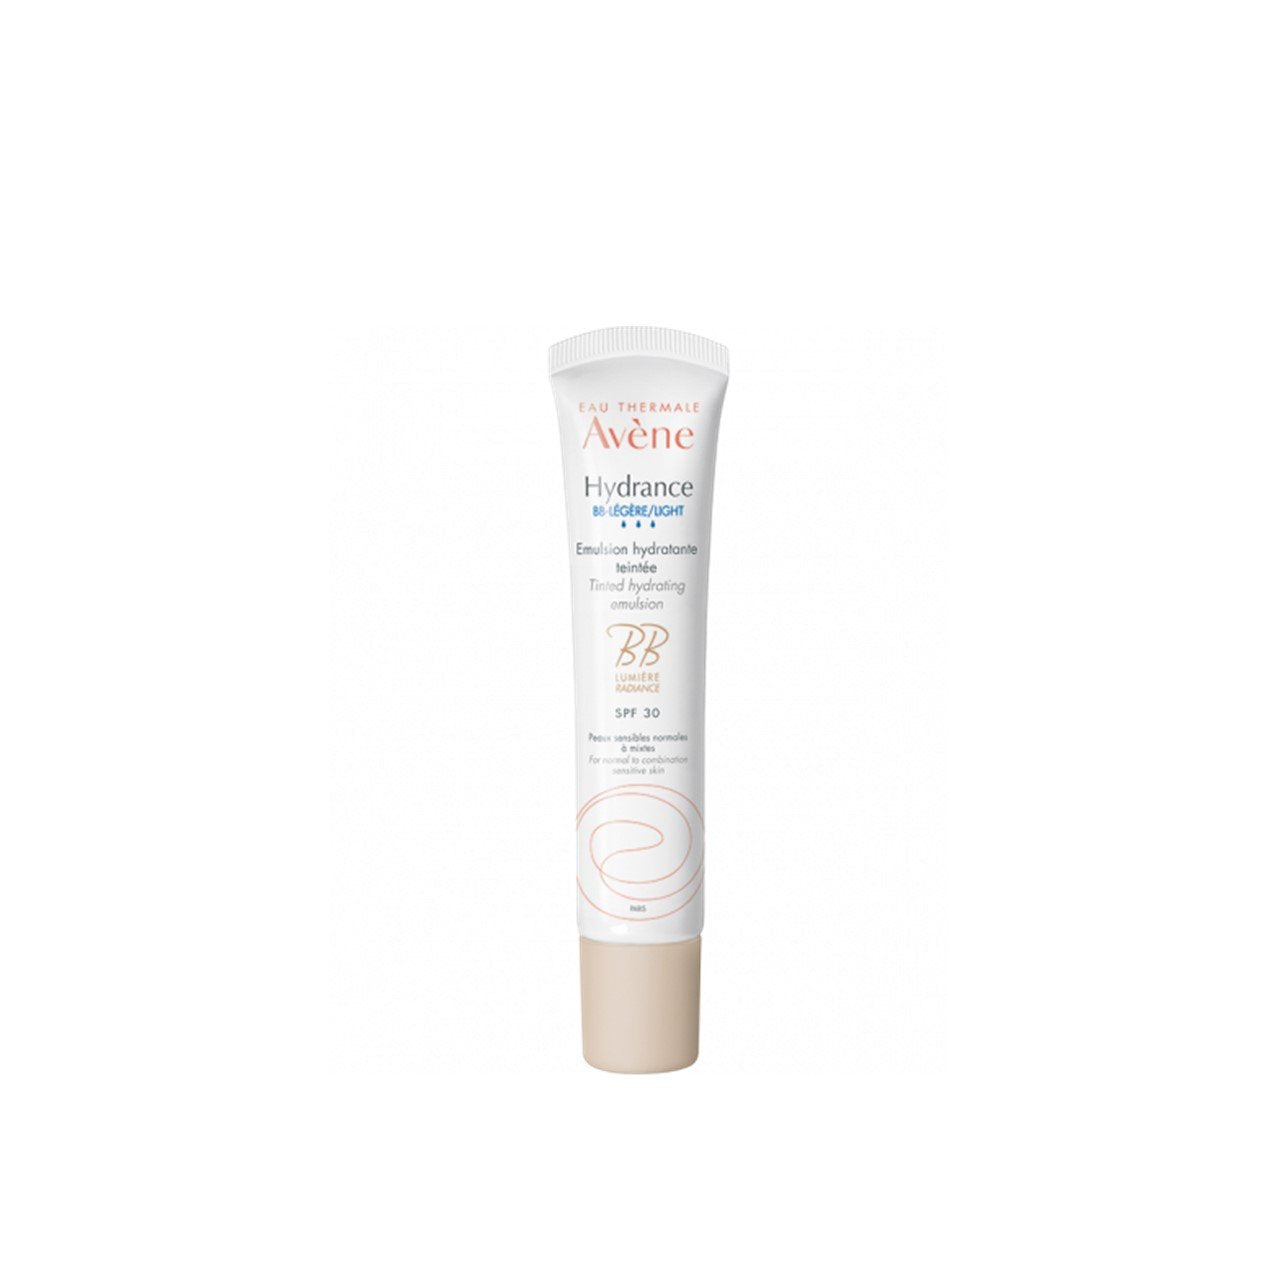 Avène Hydrance BB SPF30 With Color Oily Dehydrated Skin 40ml